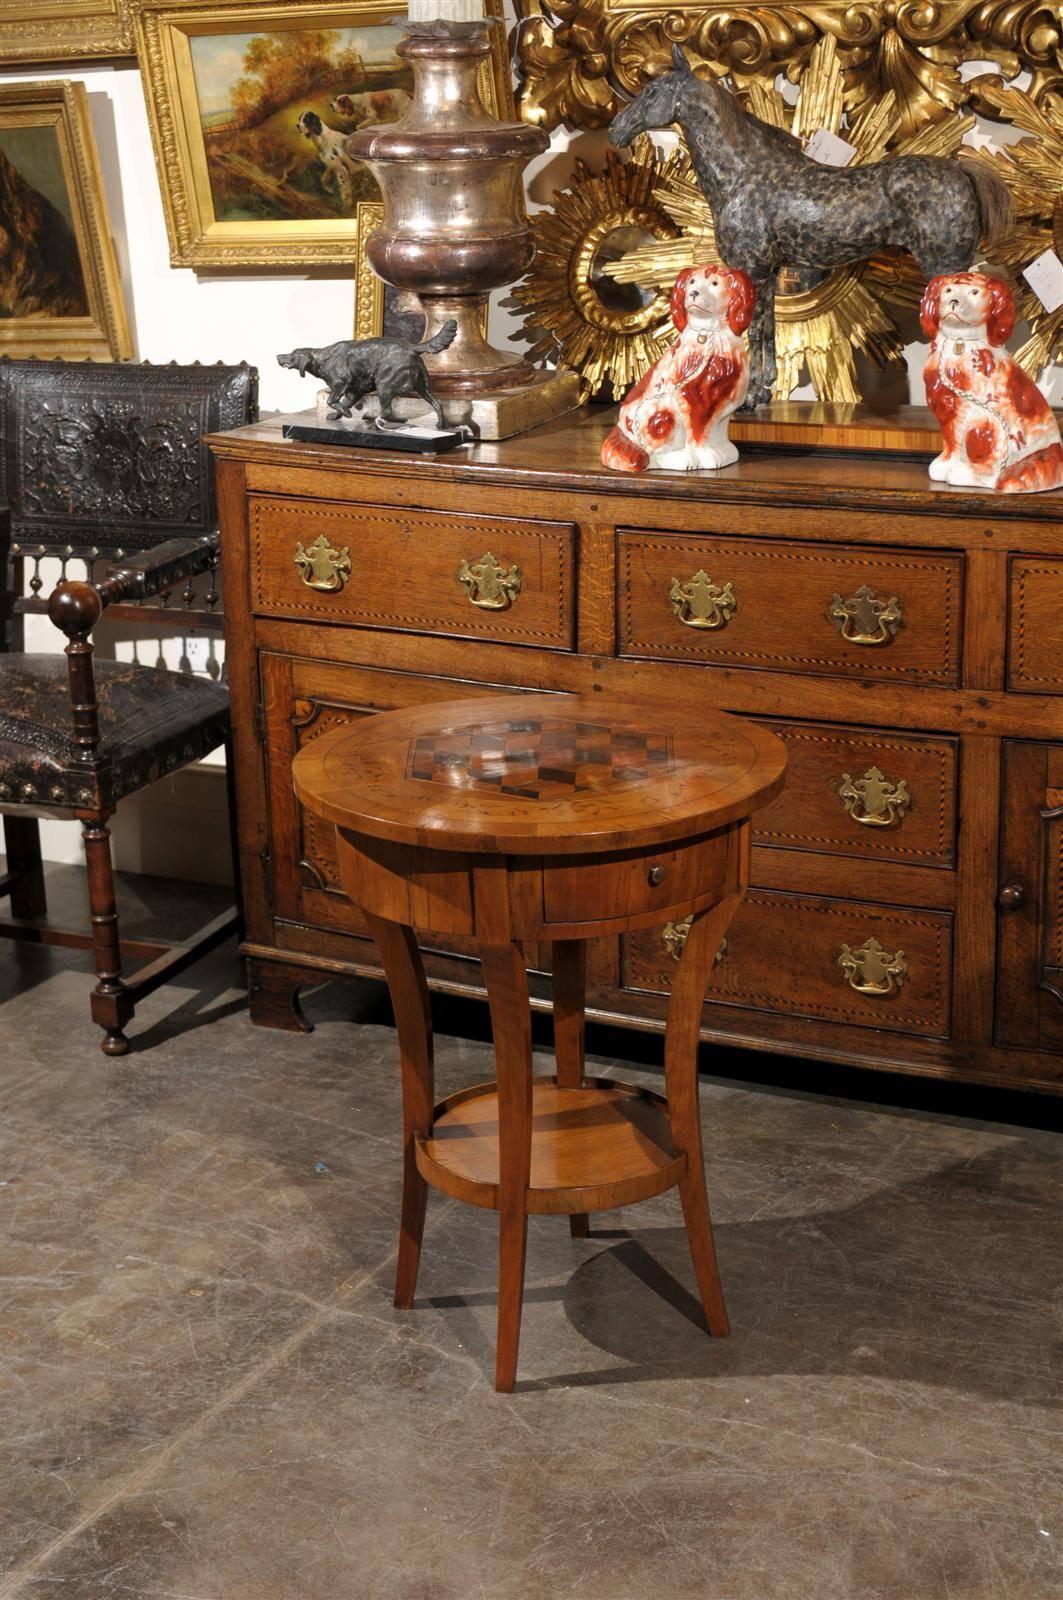 Marquetry Italian Round Side Table with Cube Parquetry Inlay from the Early 19th Century